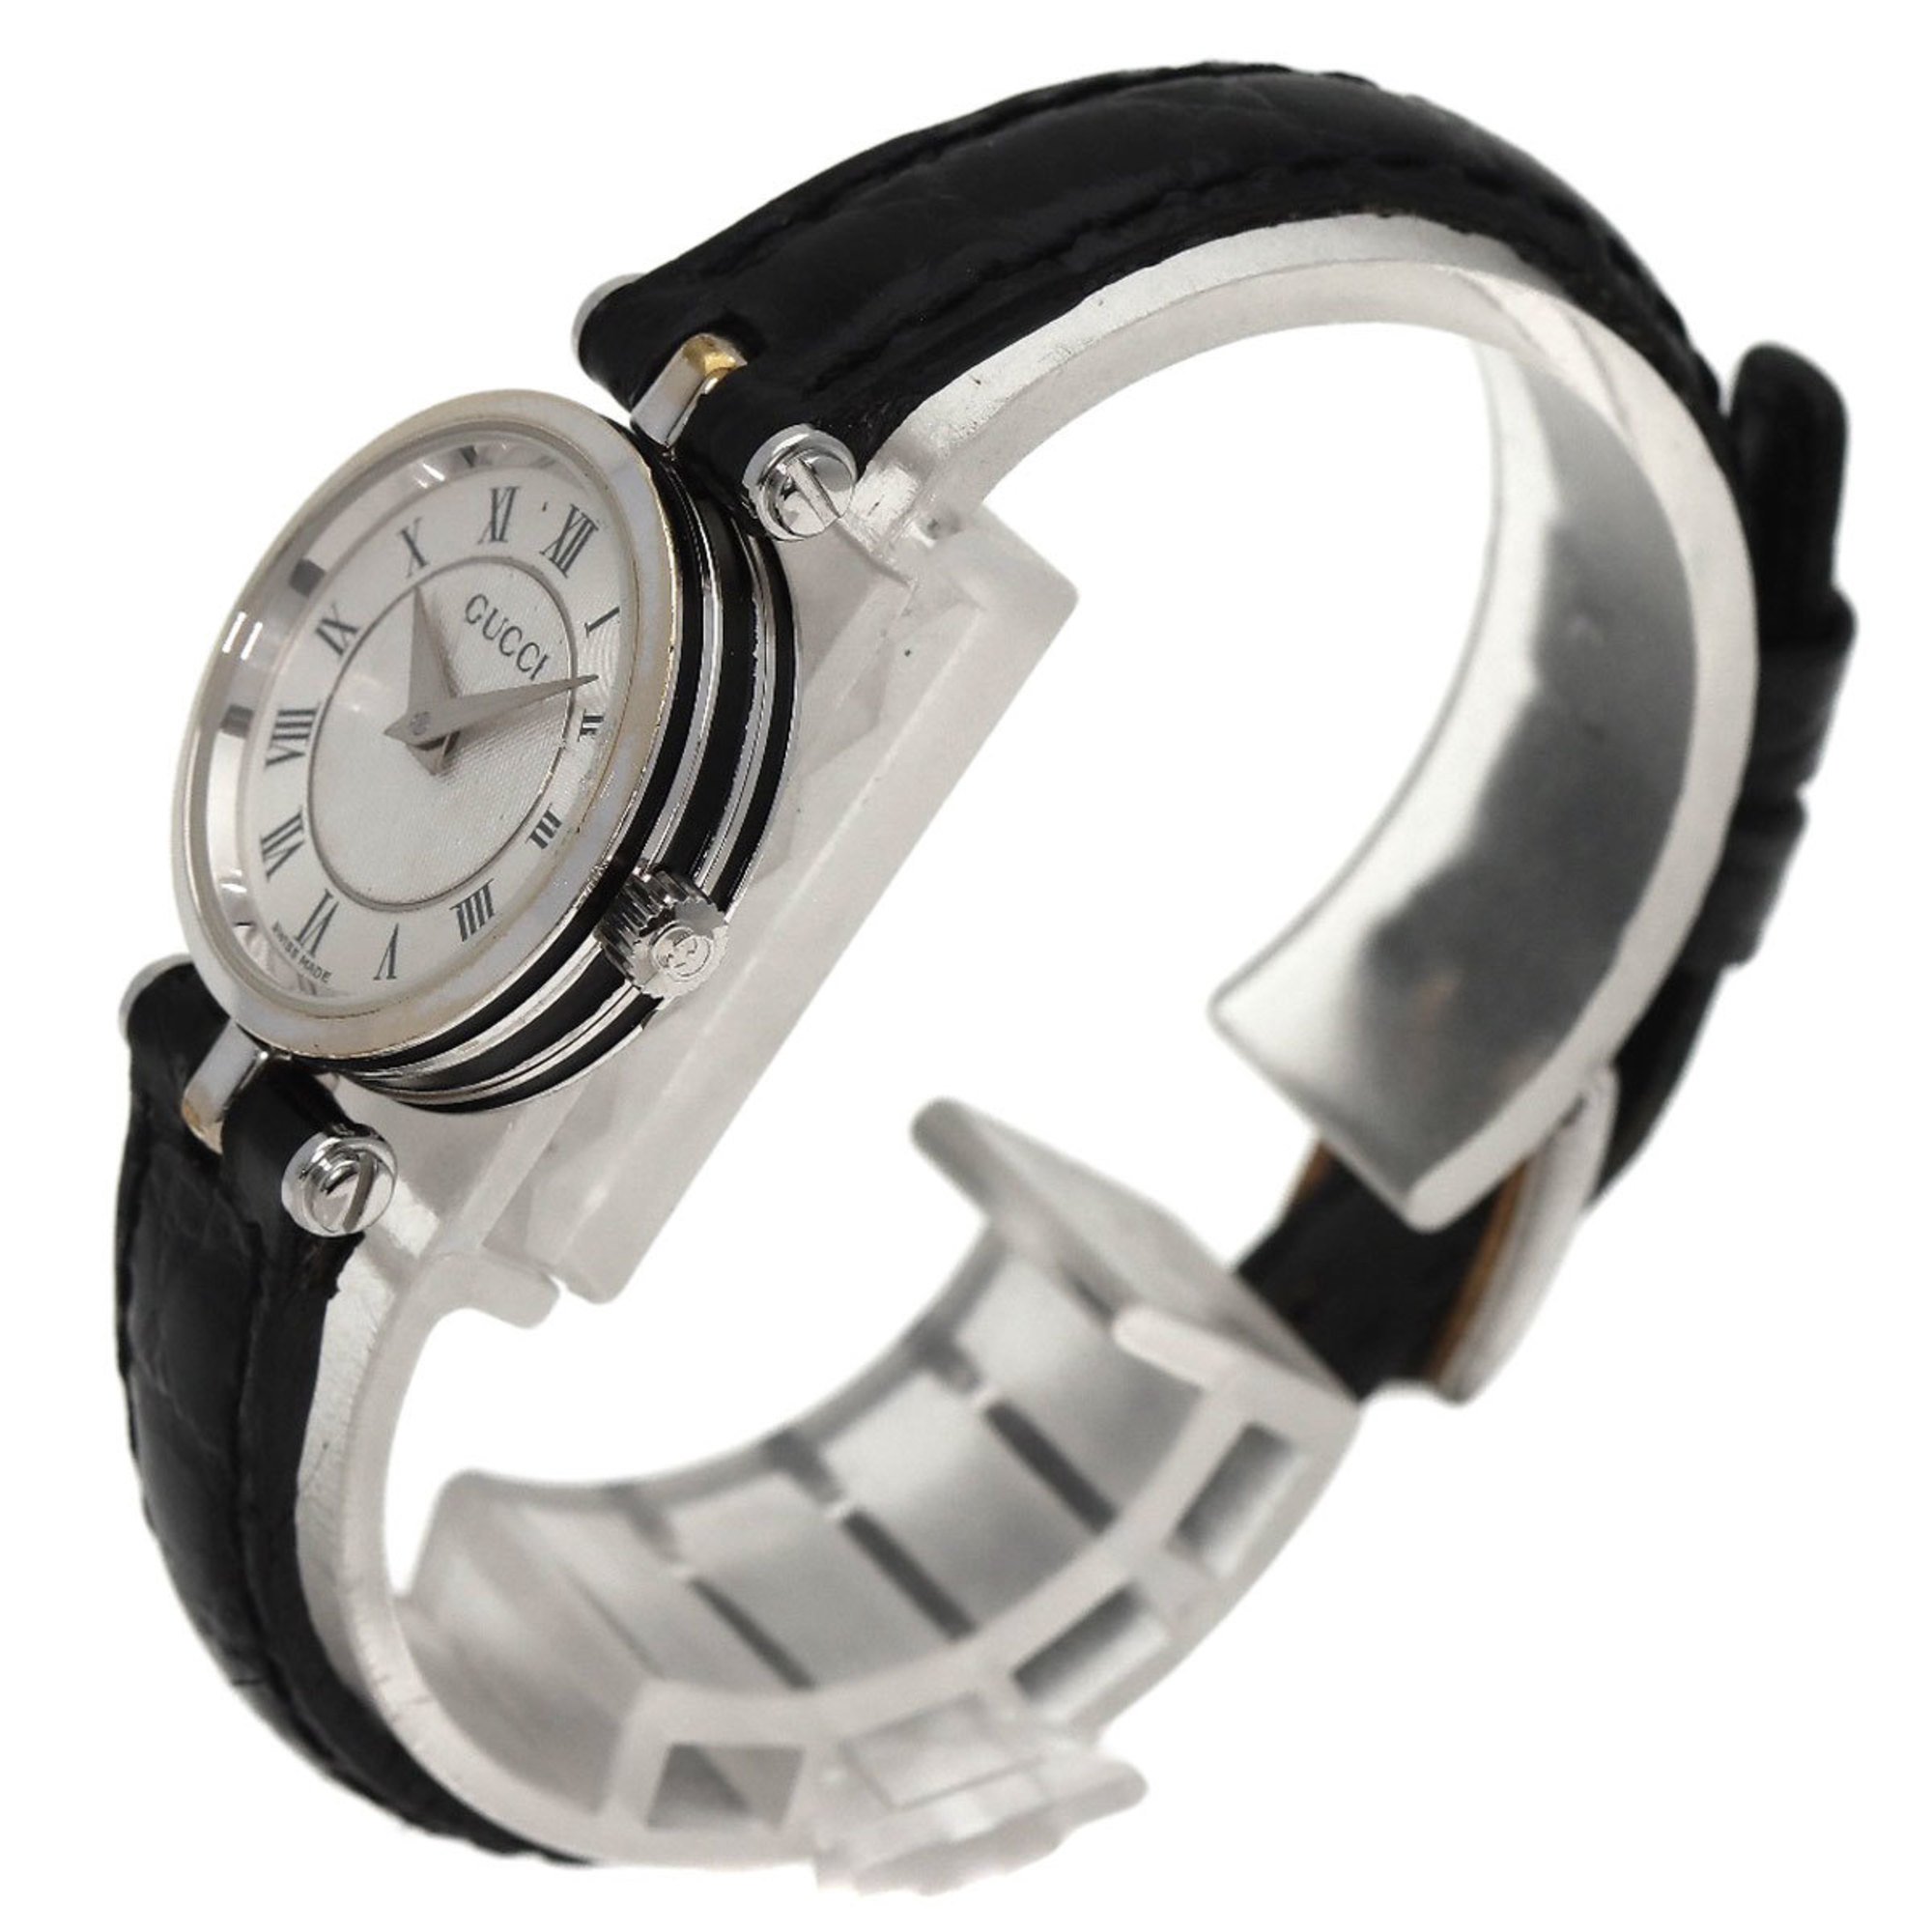 Gucci 2040L Watch Stainless Steel/Leather Ladies GUCCI